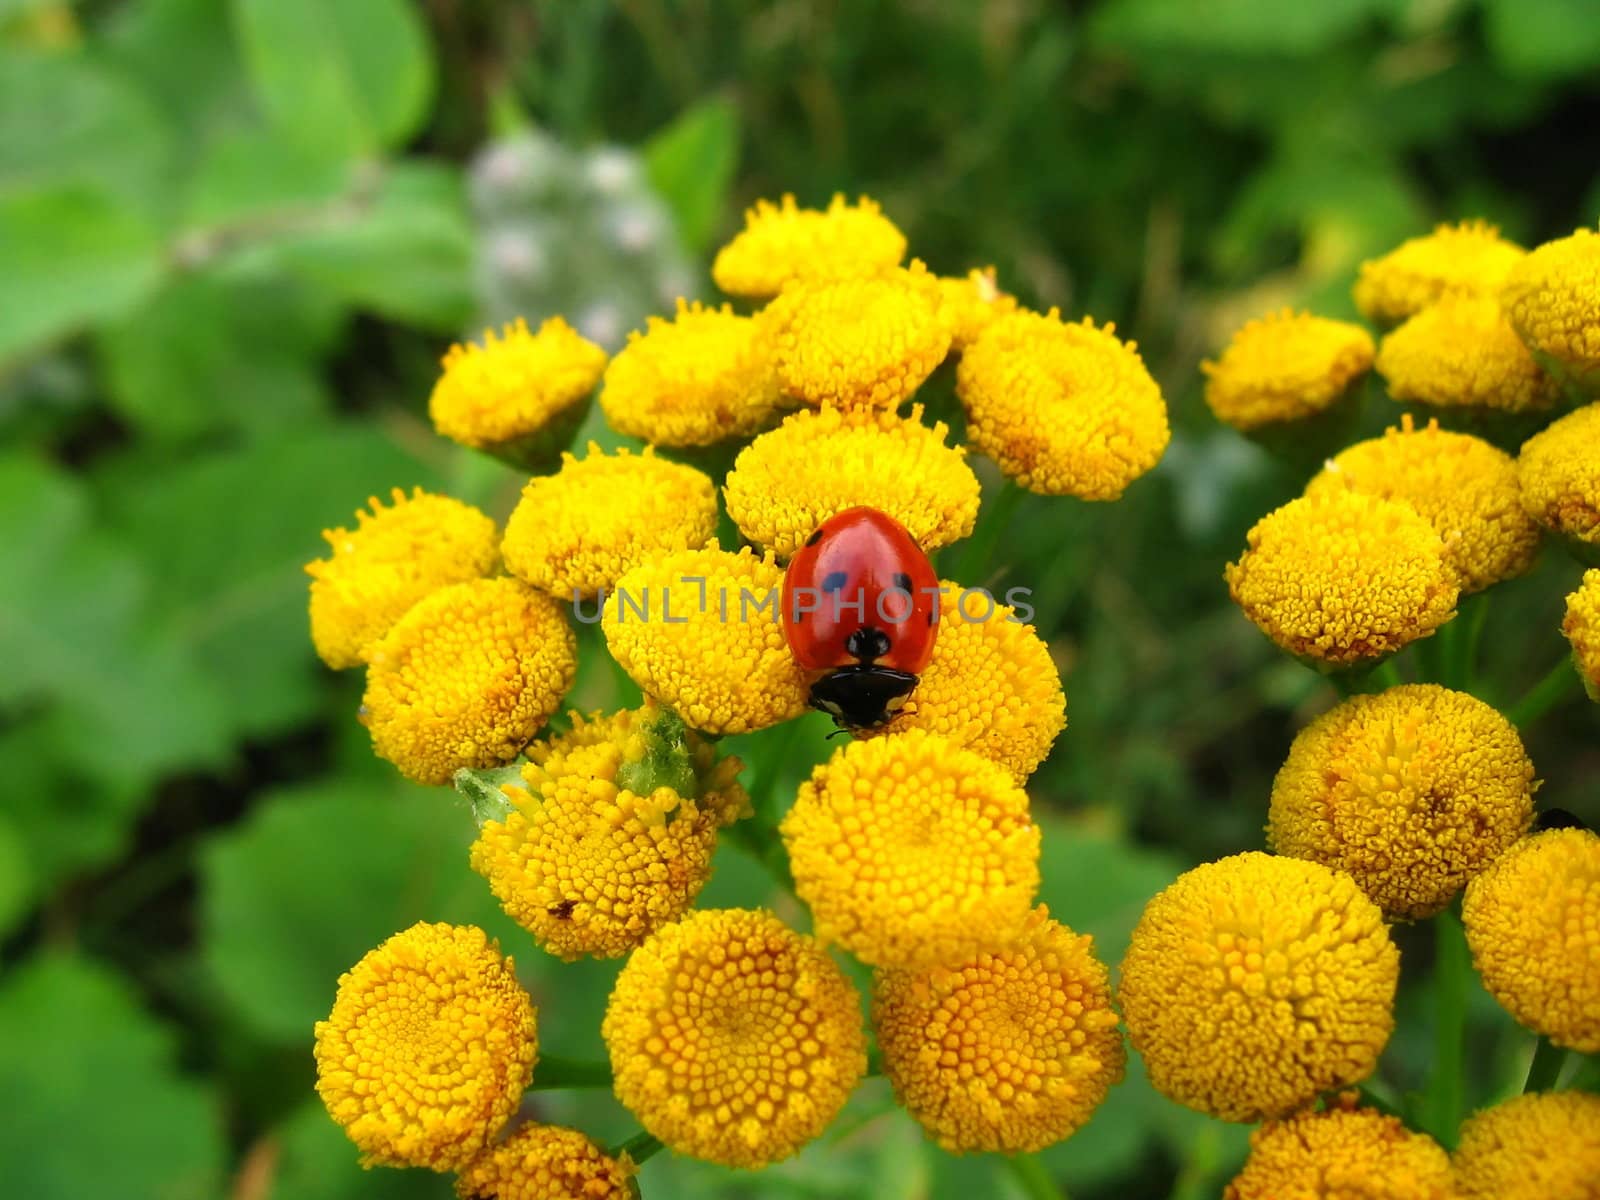 Ladybird on yellow flowers by tomatto